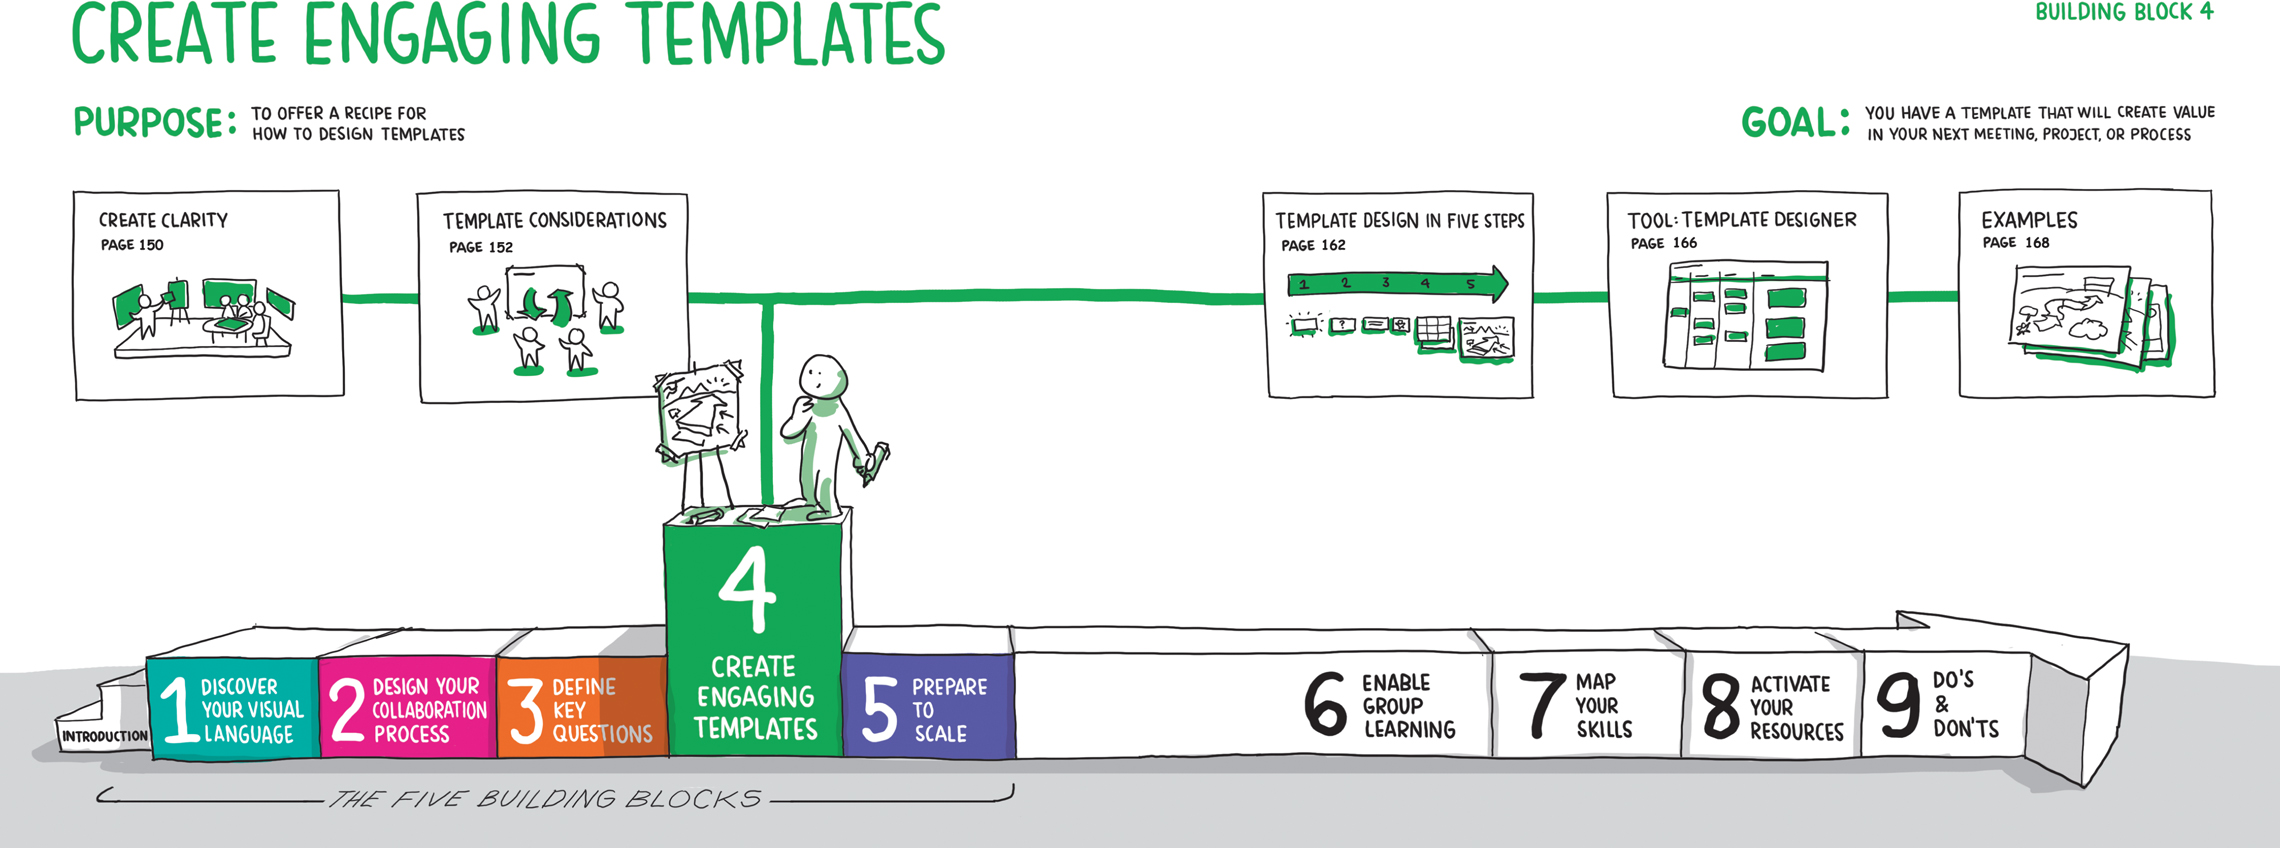 Image of a five building blocks to create engaging templates can be seen. Five blocks are individually labeled as the following, from left to right: (1) discover your visual language, (2) design your collaboration process, (3) define key questions, (4) create engaging templates, and (5) prepare to scale The fourth block “Create engaging templates” being the longest one. This block consists of a human icon in a confused state seeing at a poster on an easel. Above blocks one to three, two following more posters can be seen: Create clarity and template considerations.